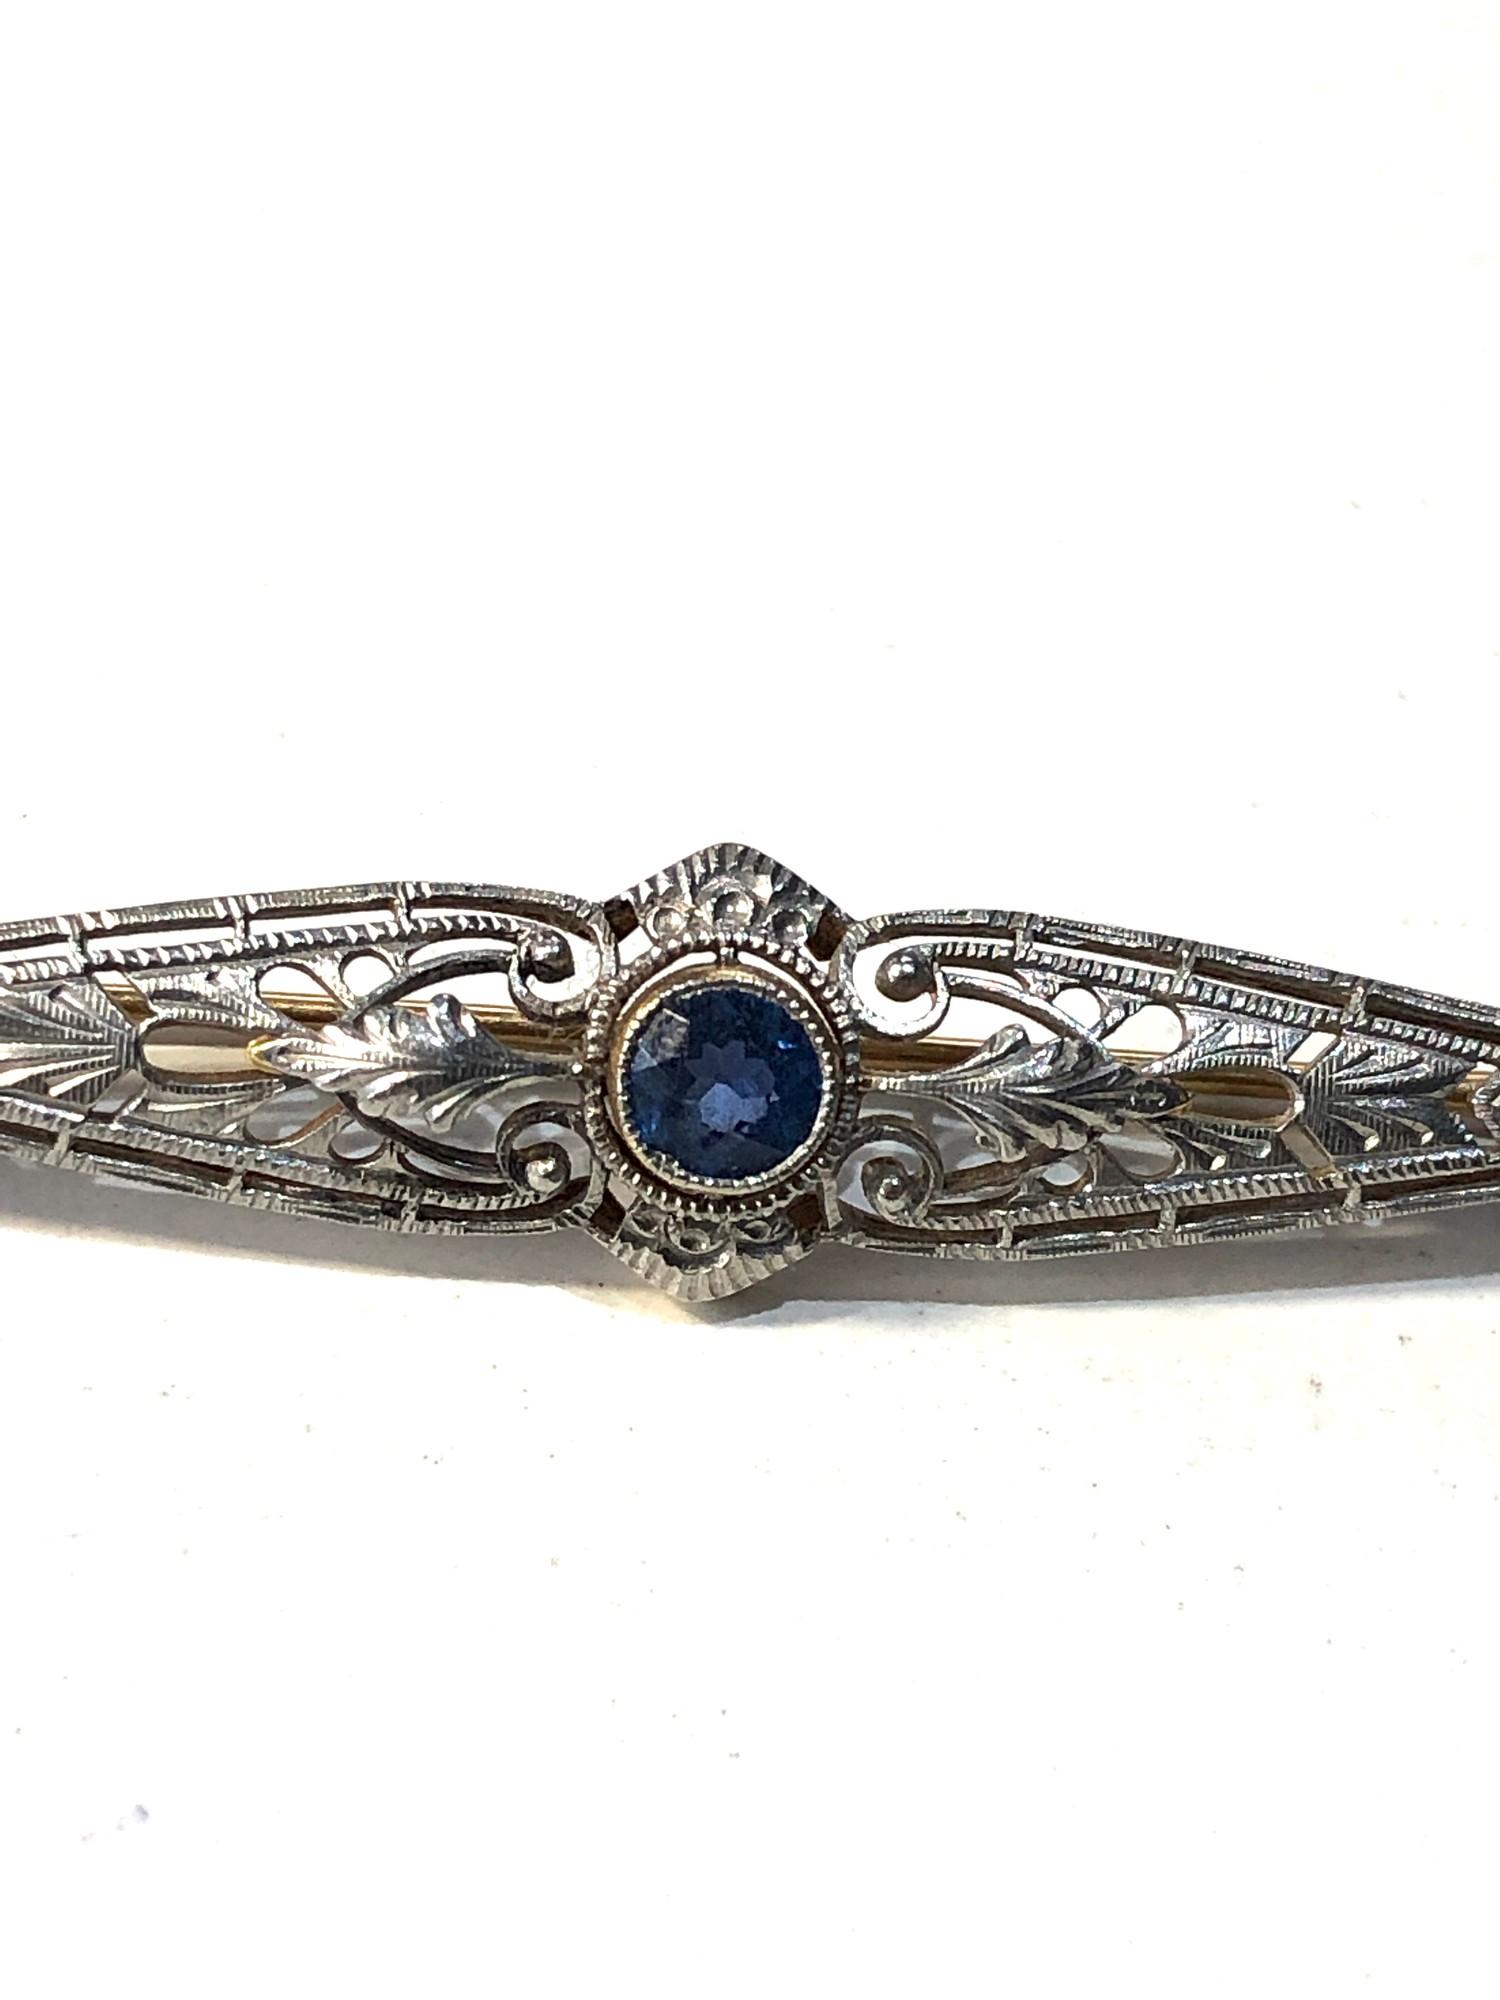 Vintage 14ct gold and platinum sapphire brooch measures approx 5.3cm by 1cm weight - Image 2 of 3